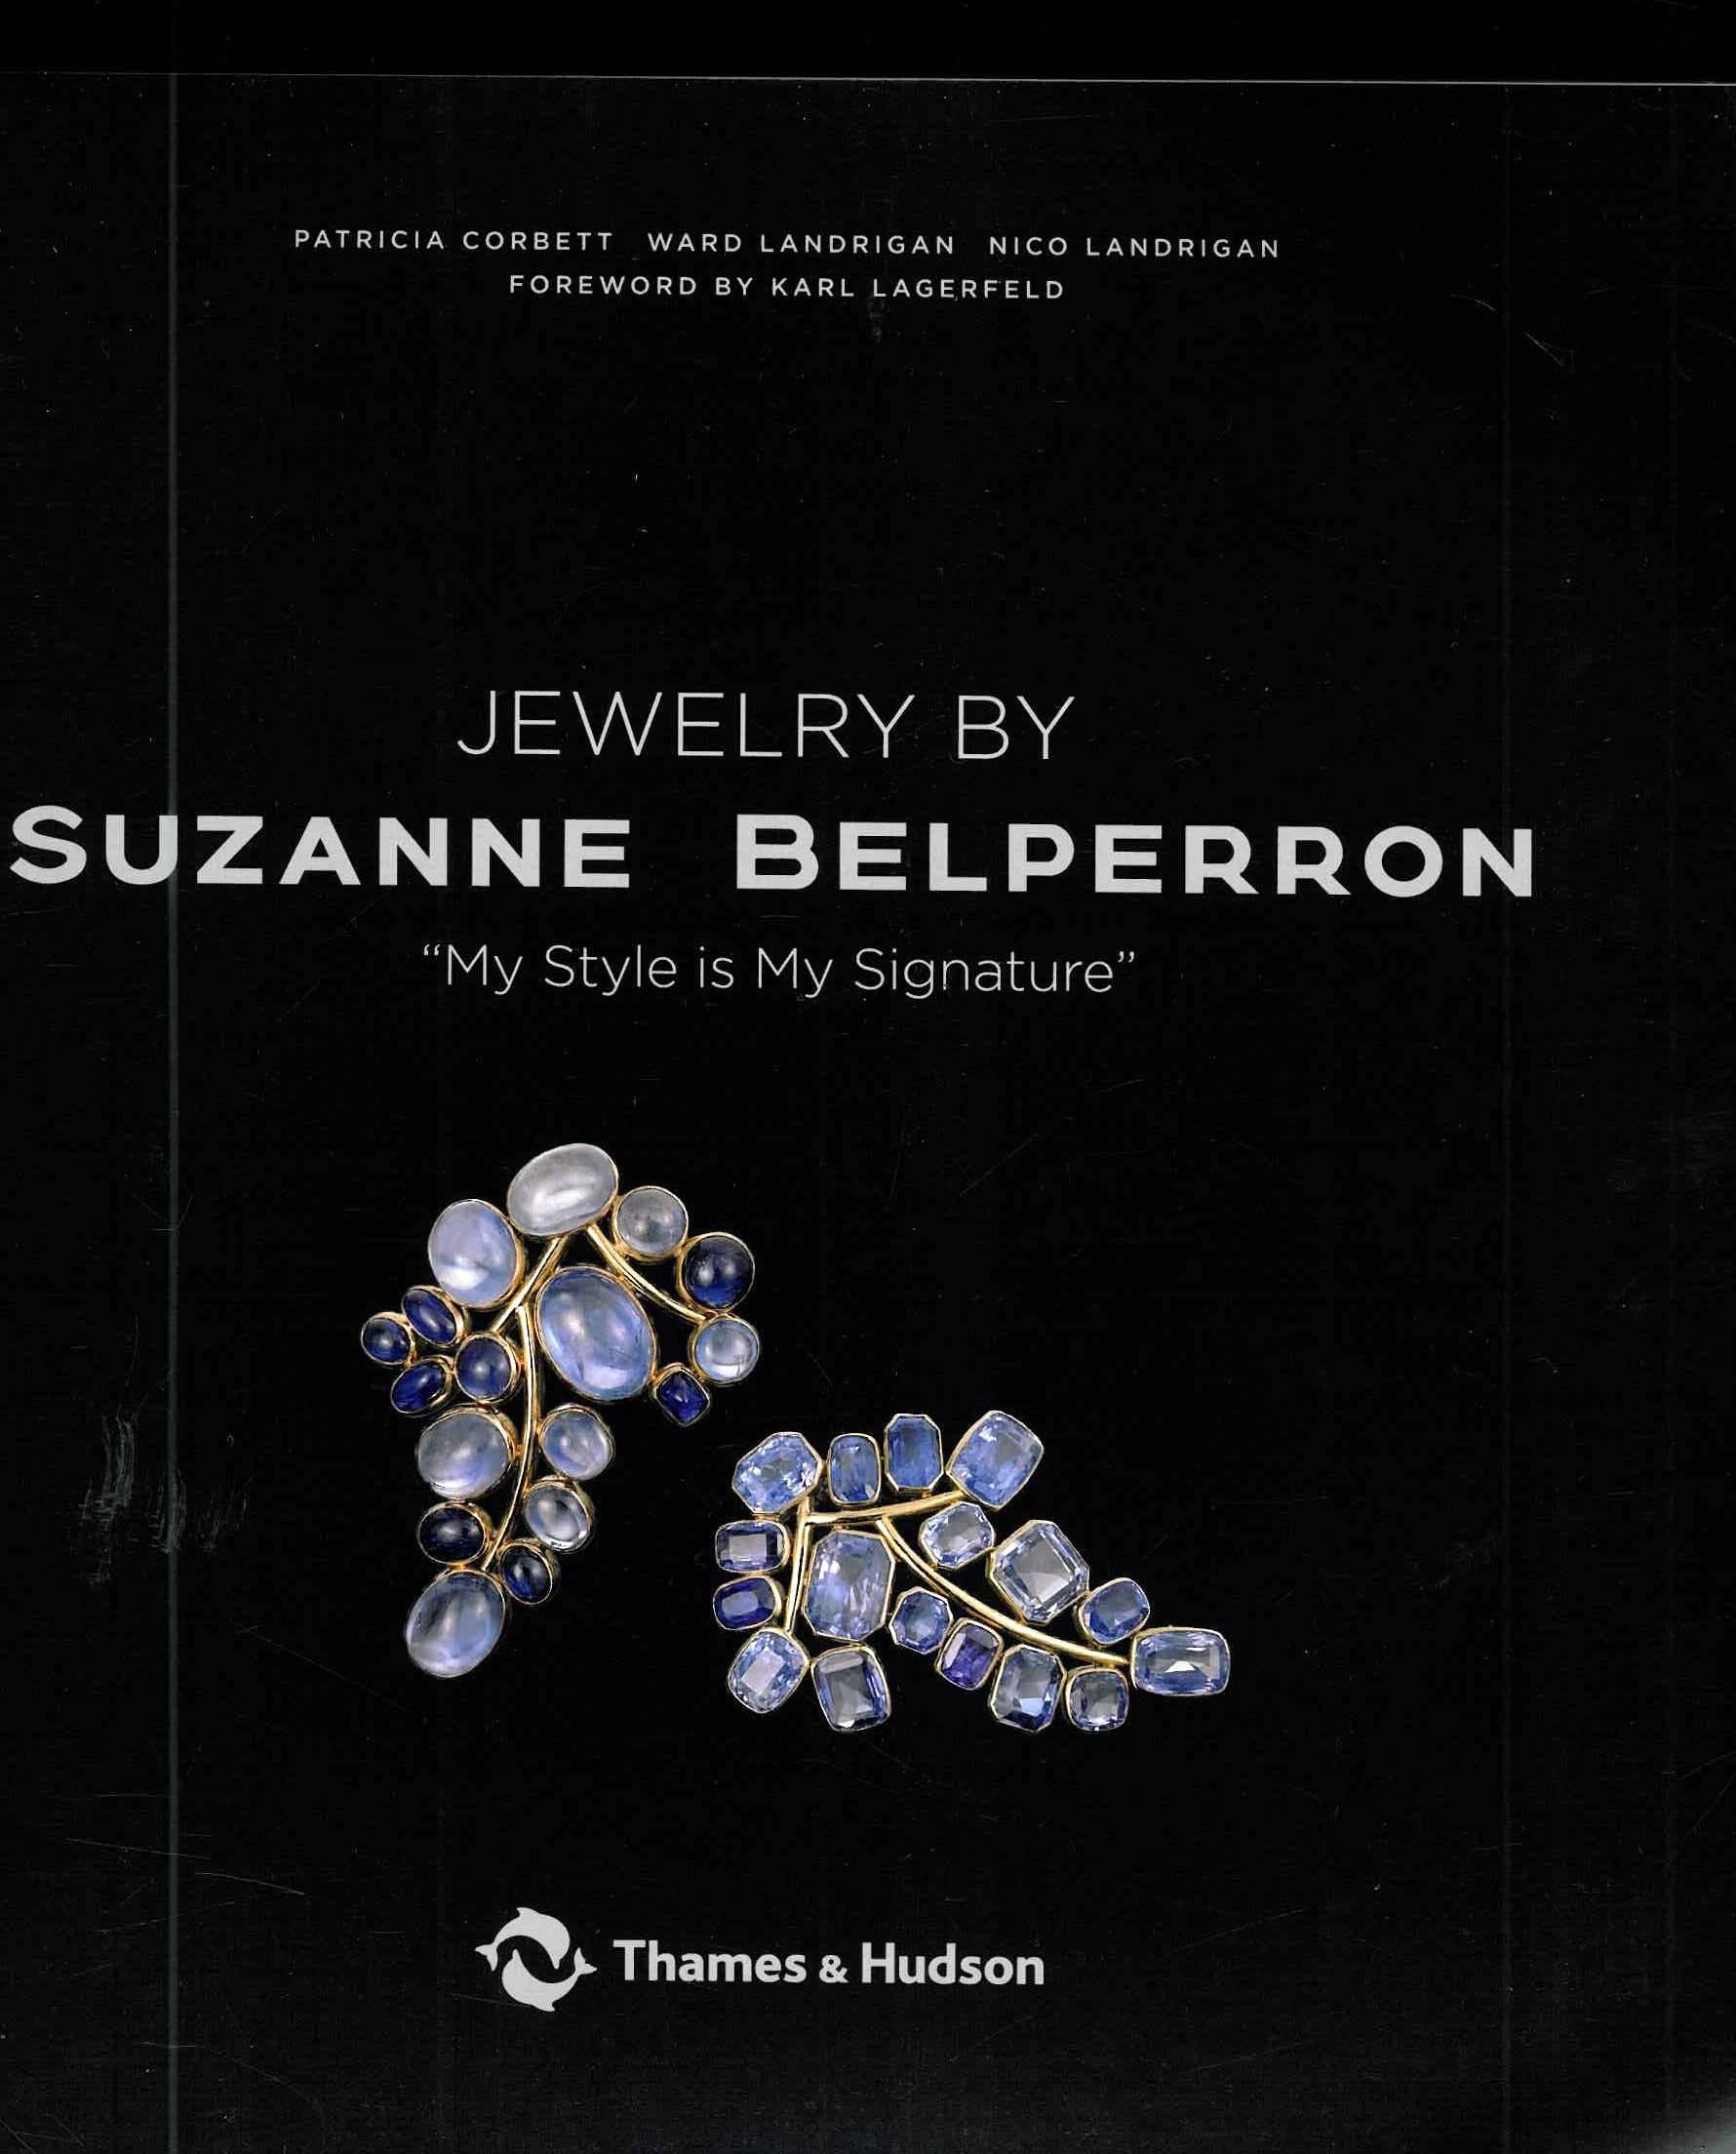 Book of Jewelry by Suzanne Belperron 